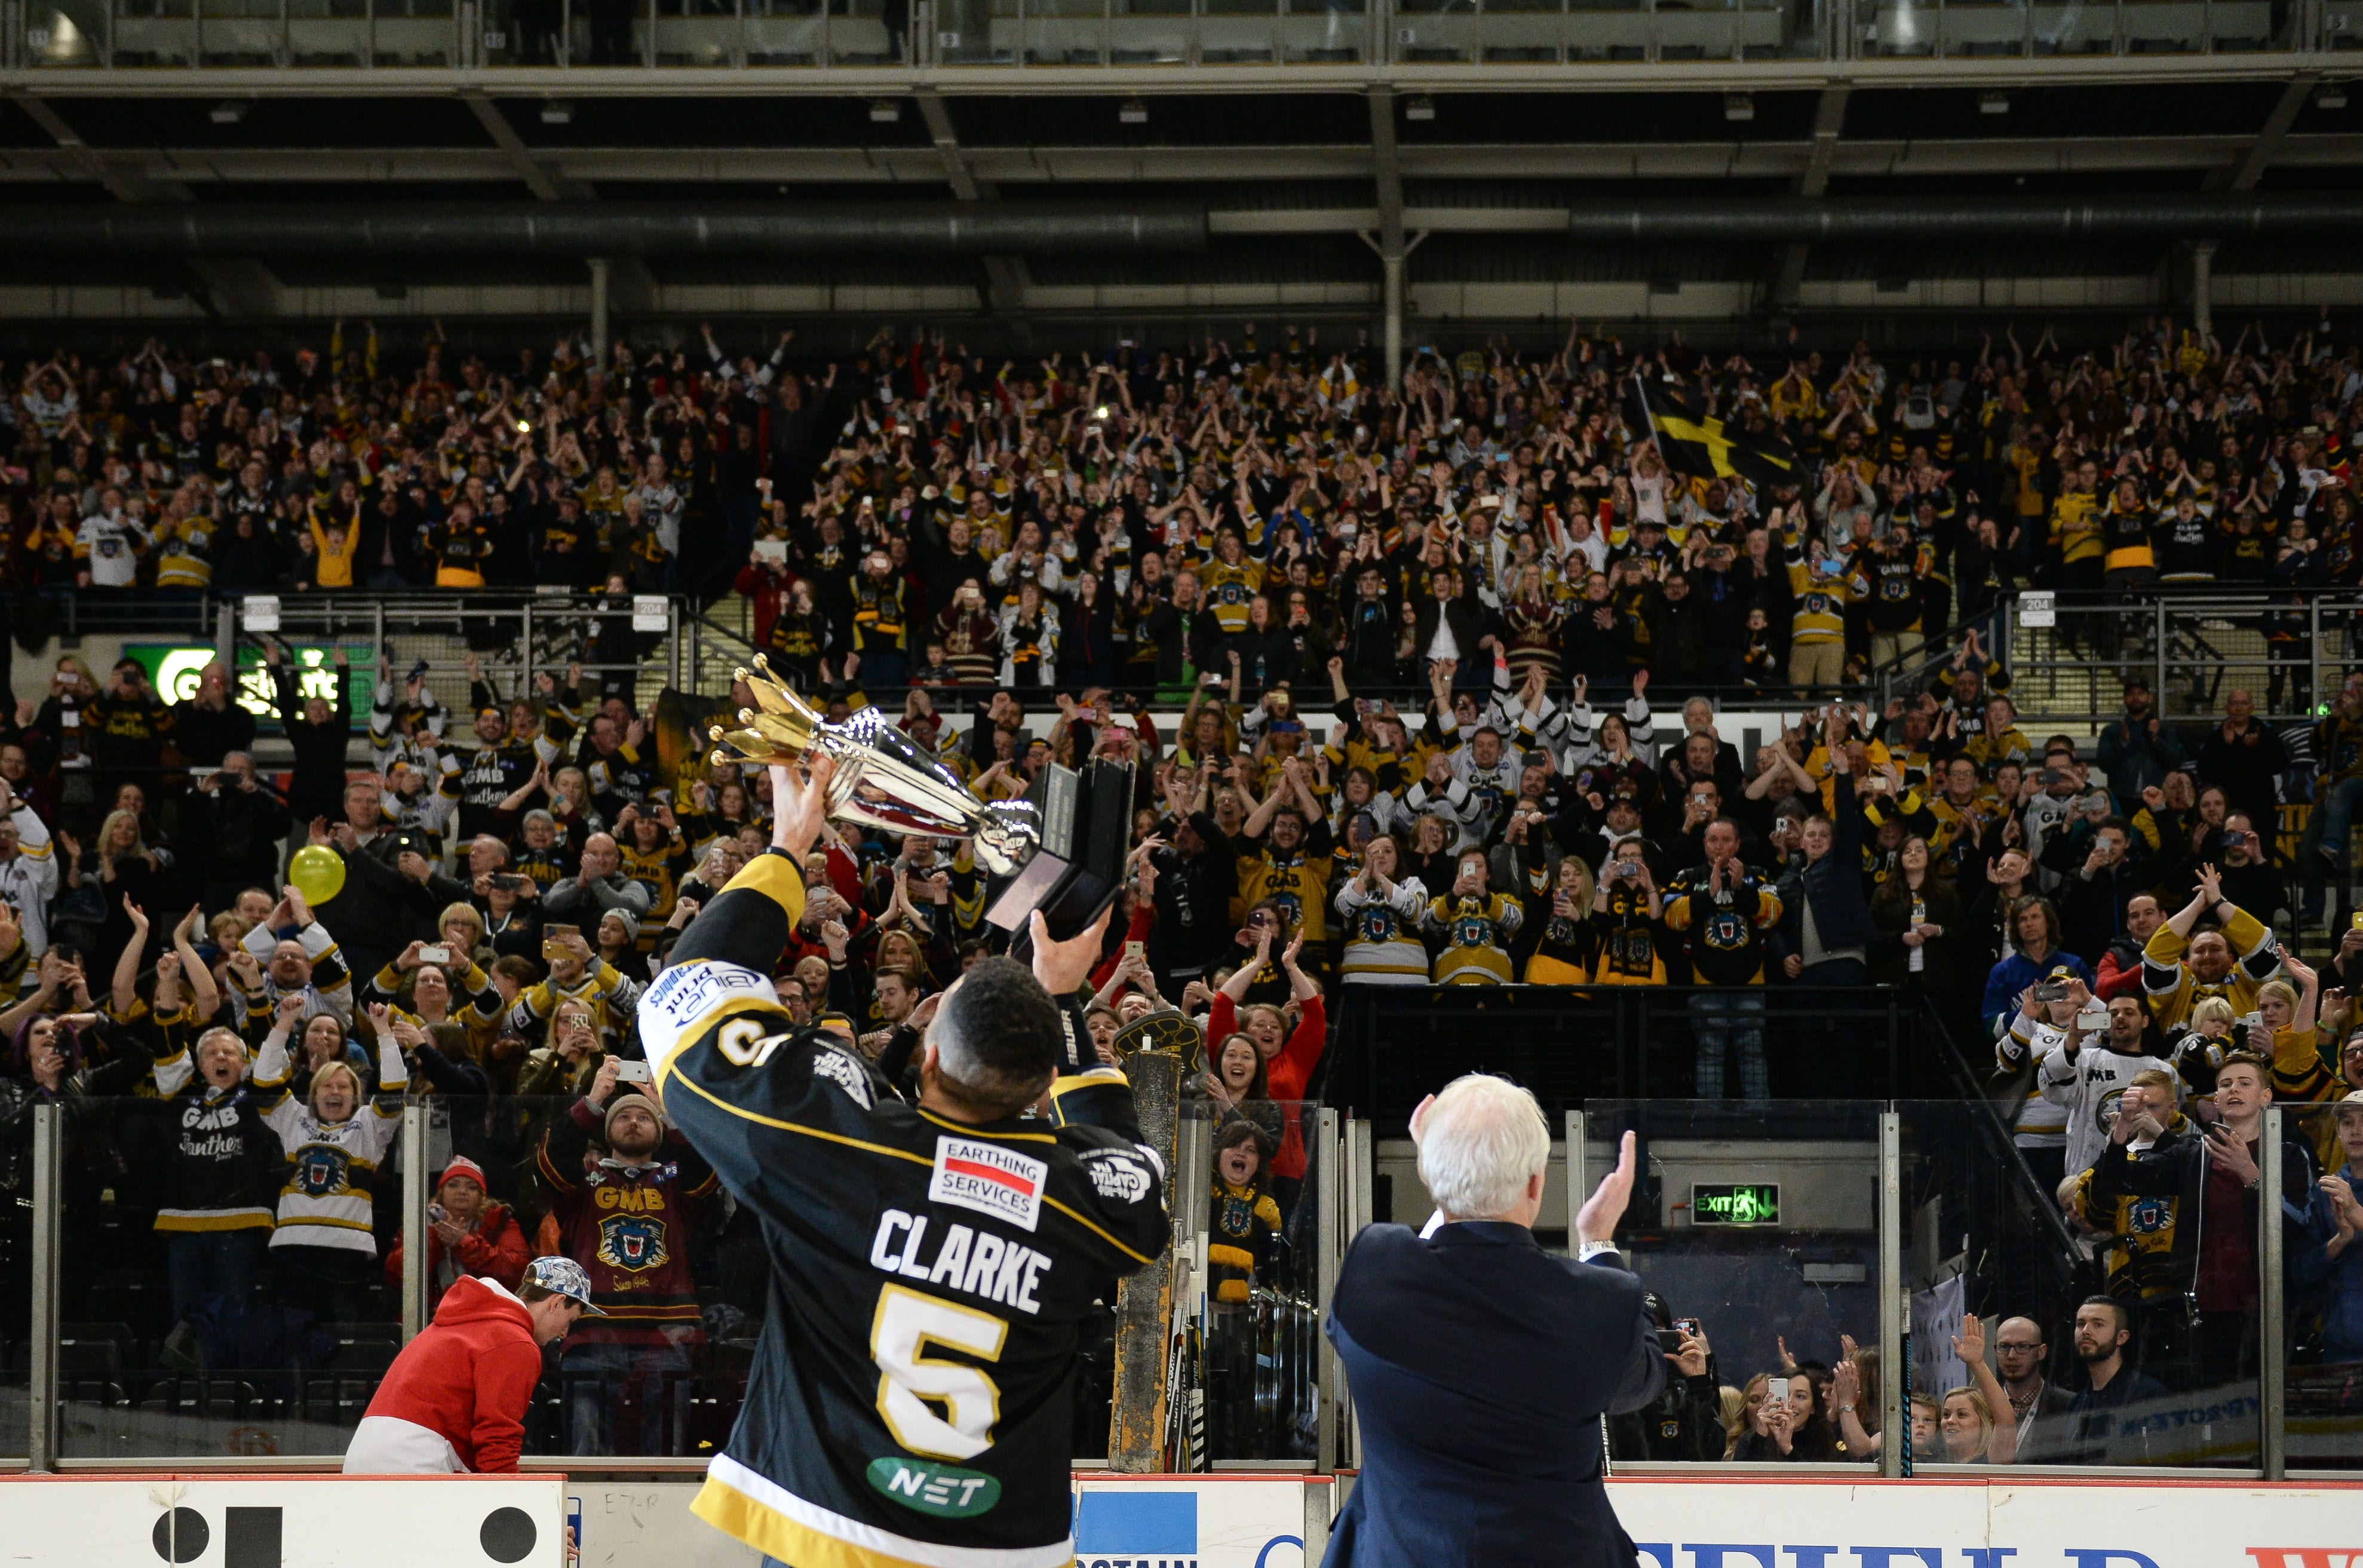 In 2016 Nottingham yet again proved they are in a class of their own when it comes to the Challenge Cup